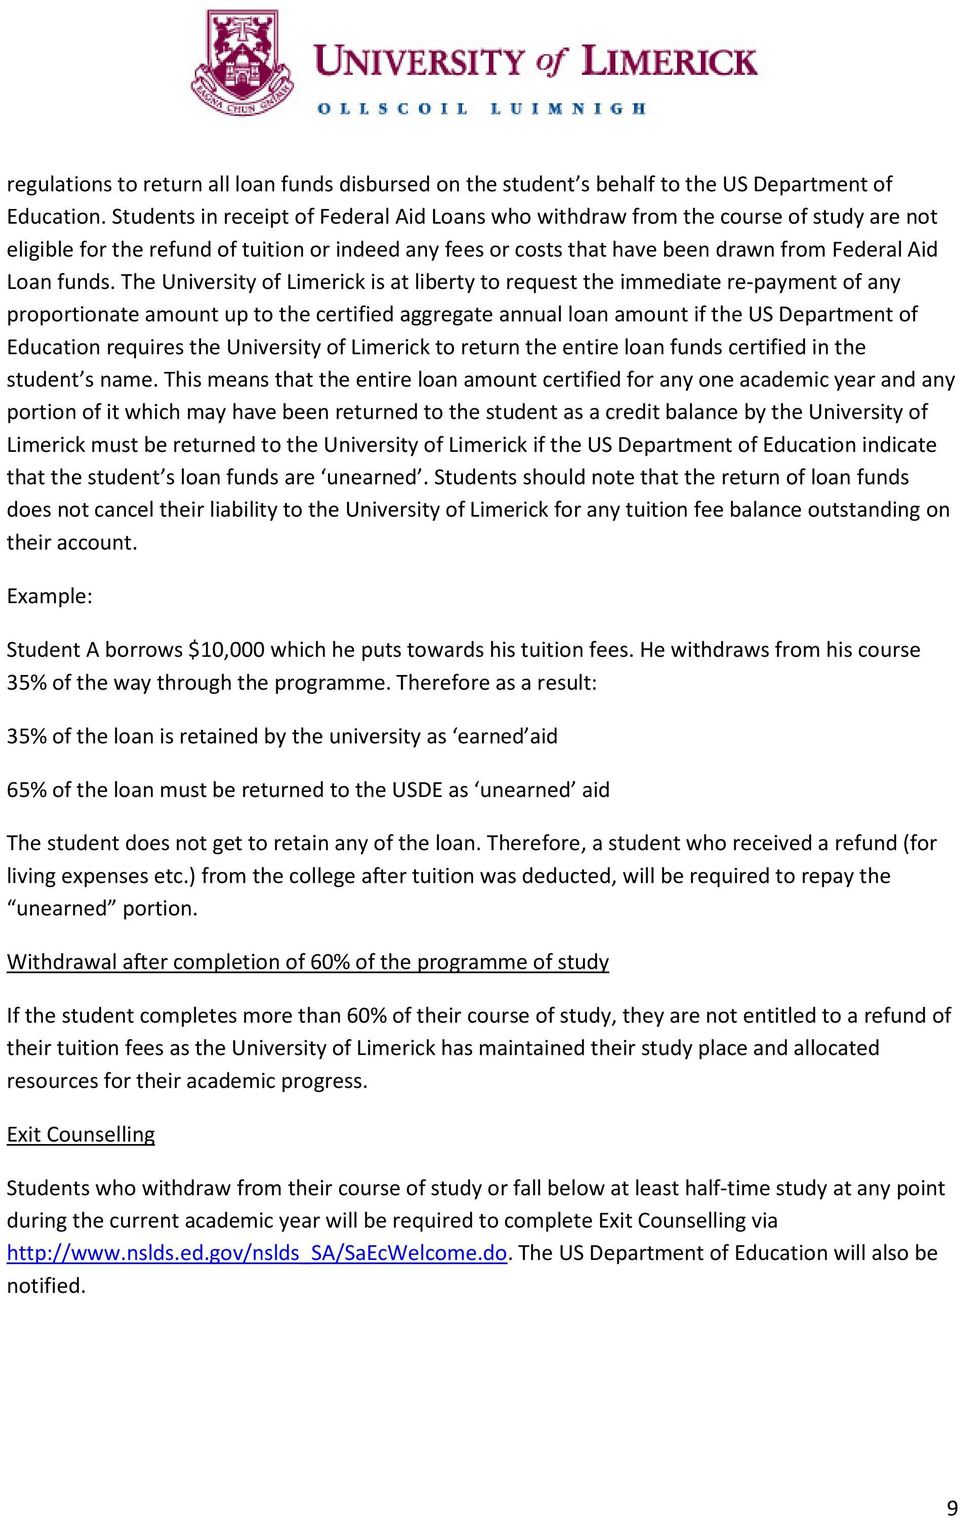 The University of Limerick is at liberty to request the immediate re-payment of any proportionate amount up to the certified aggregate annual loan amount if the US Department of Education requires